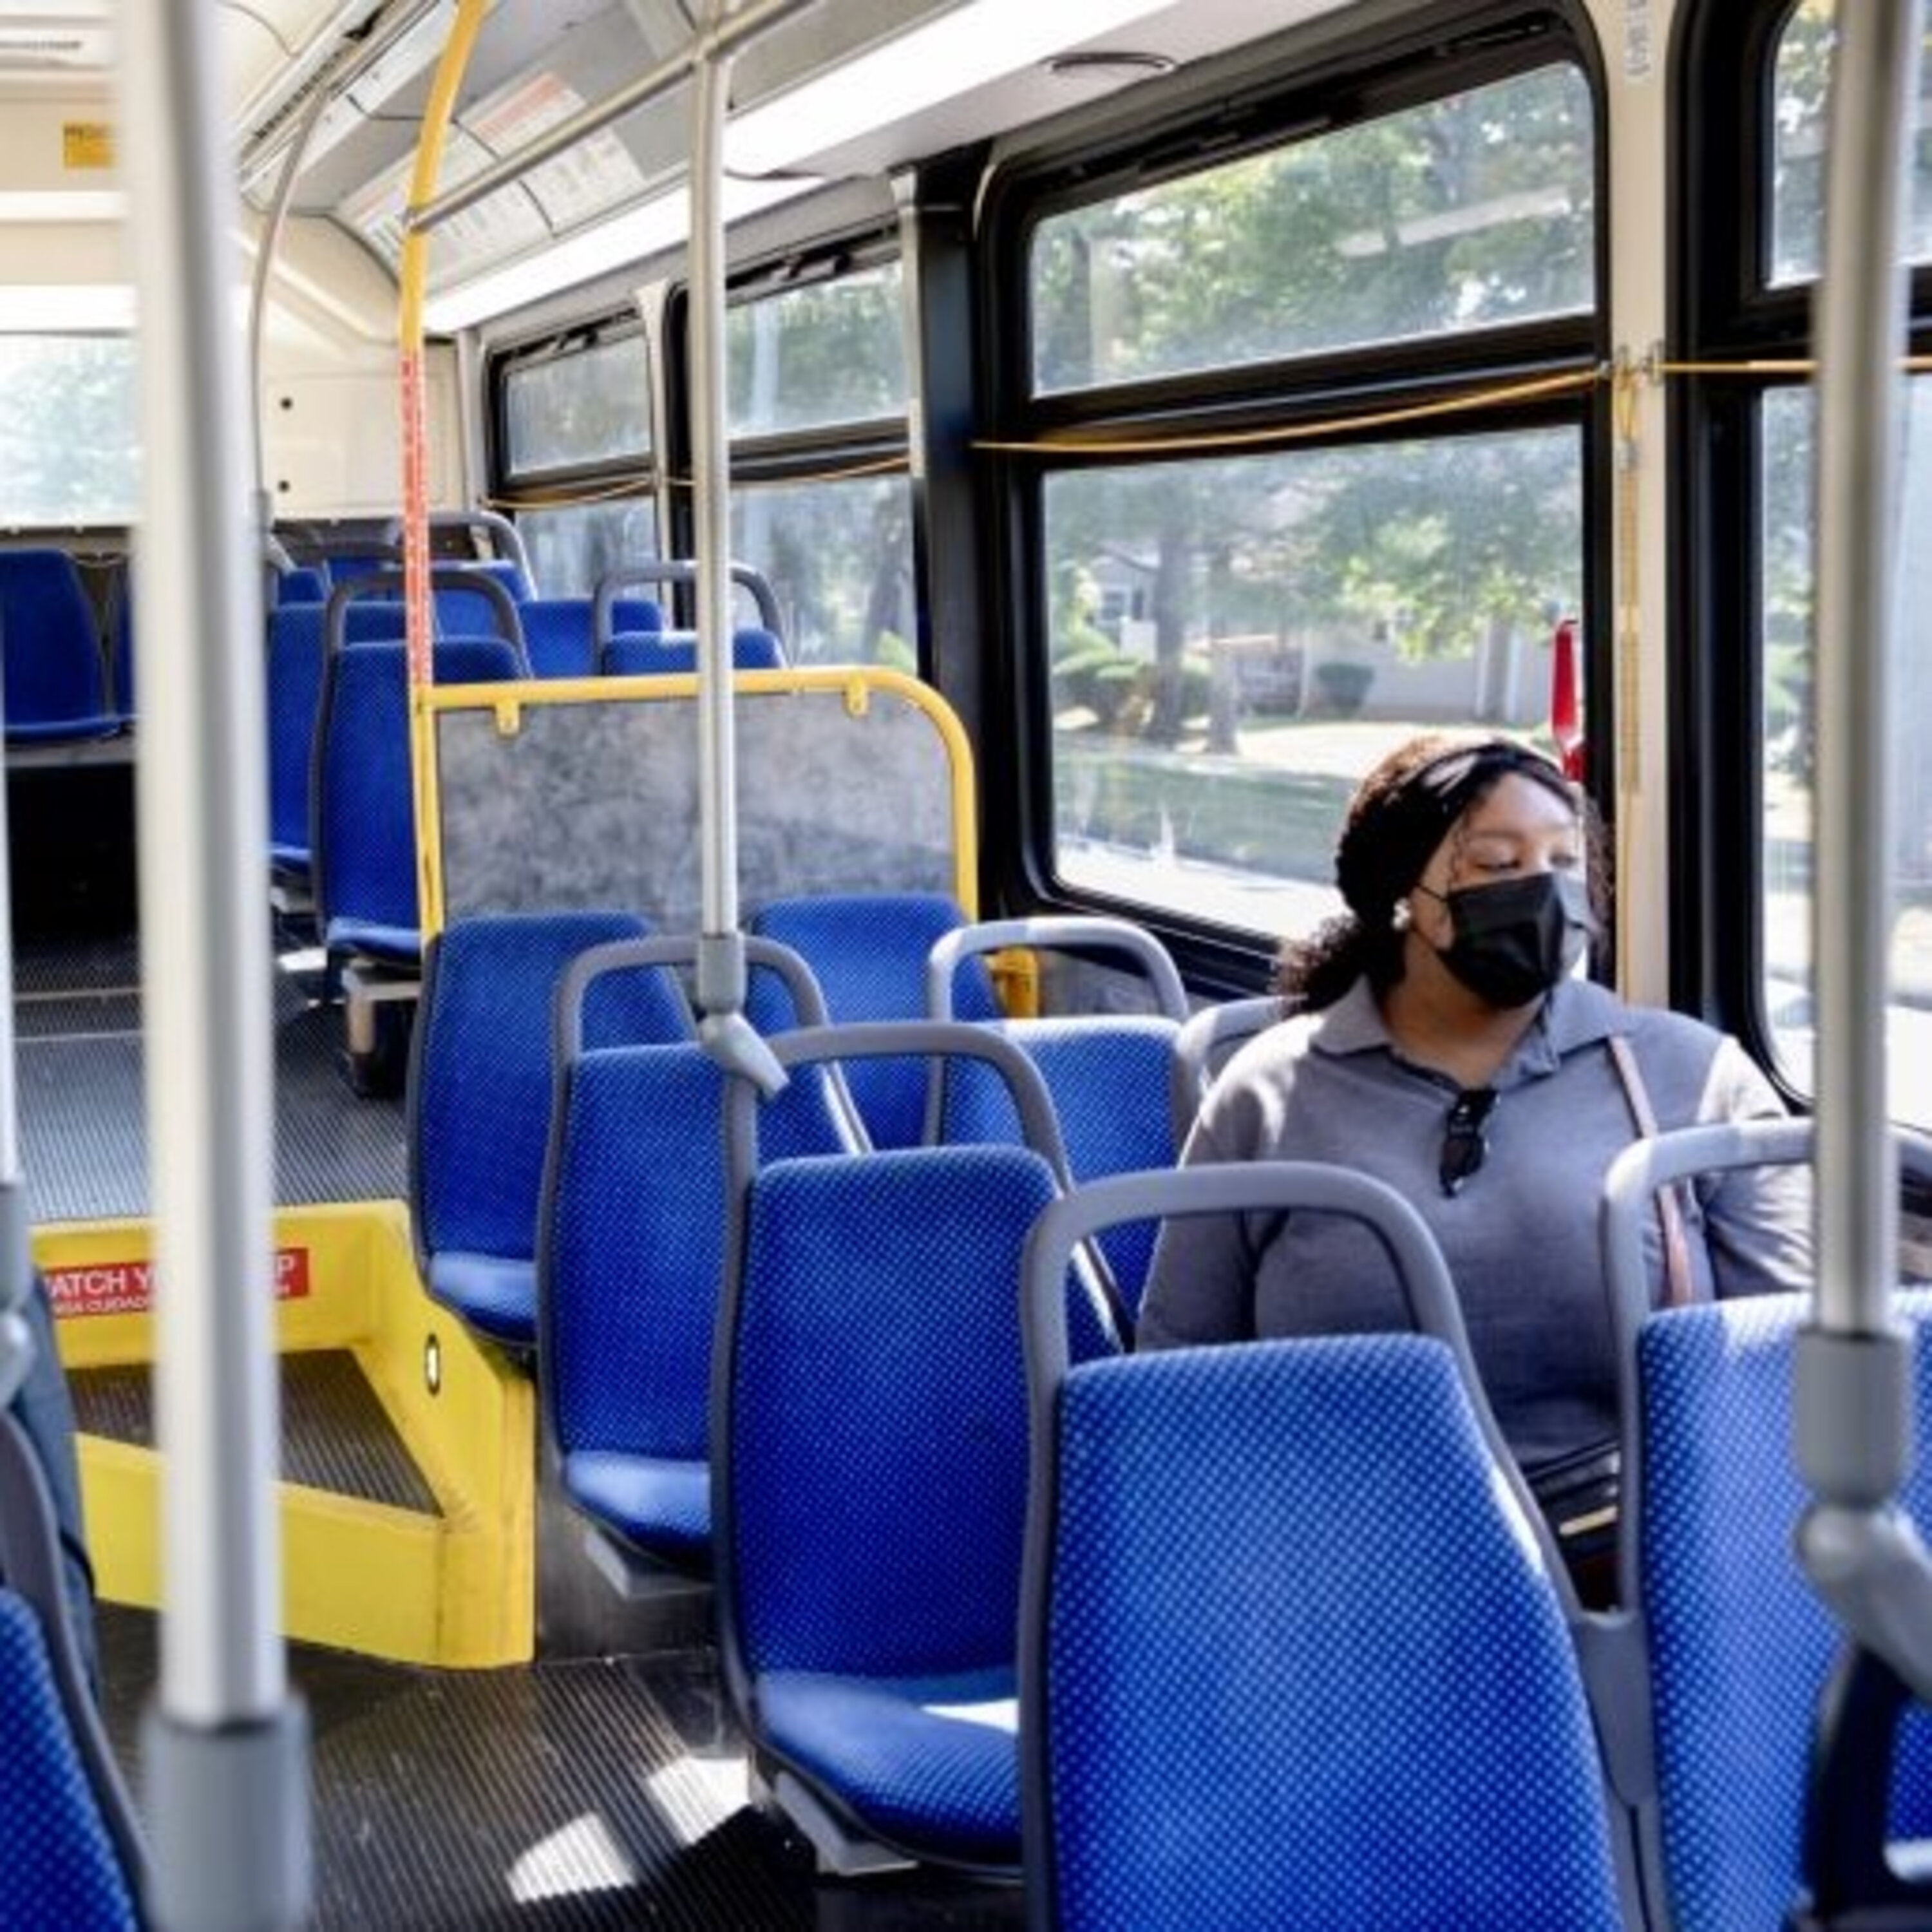 Bus ridership is coming back in Connecticut